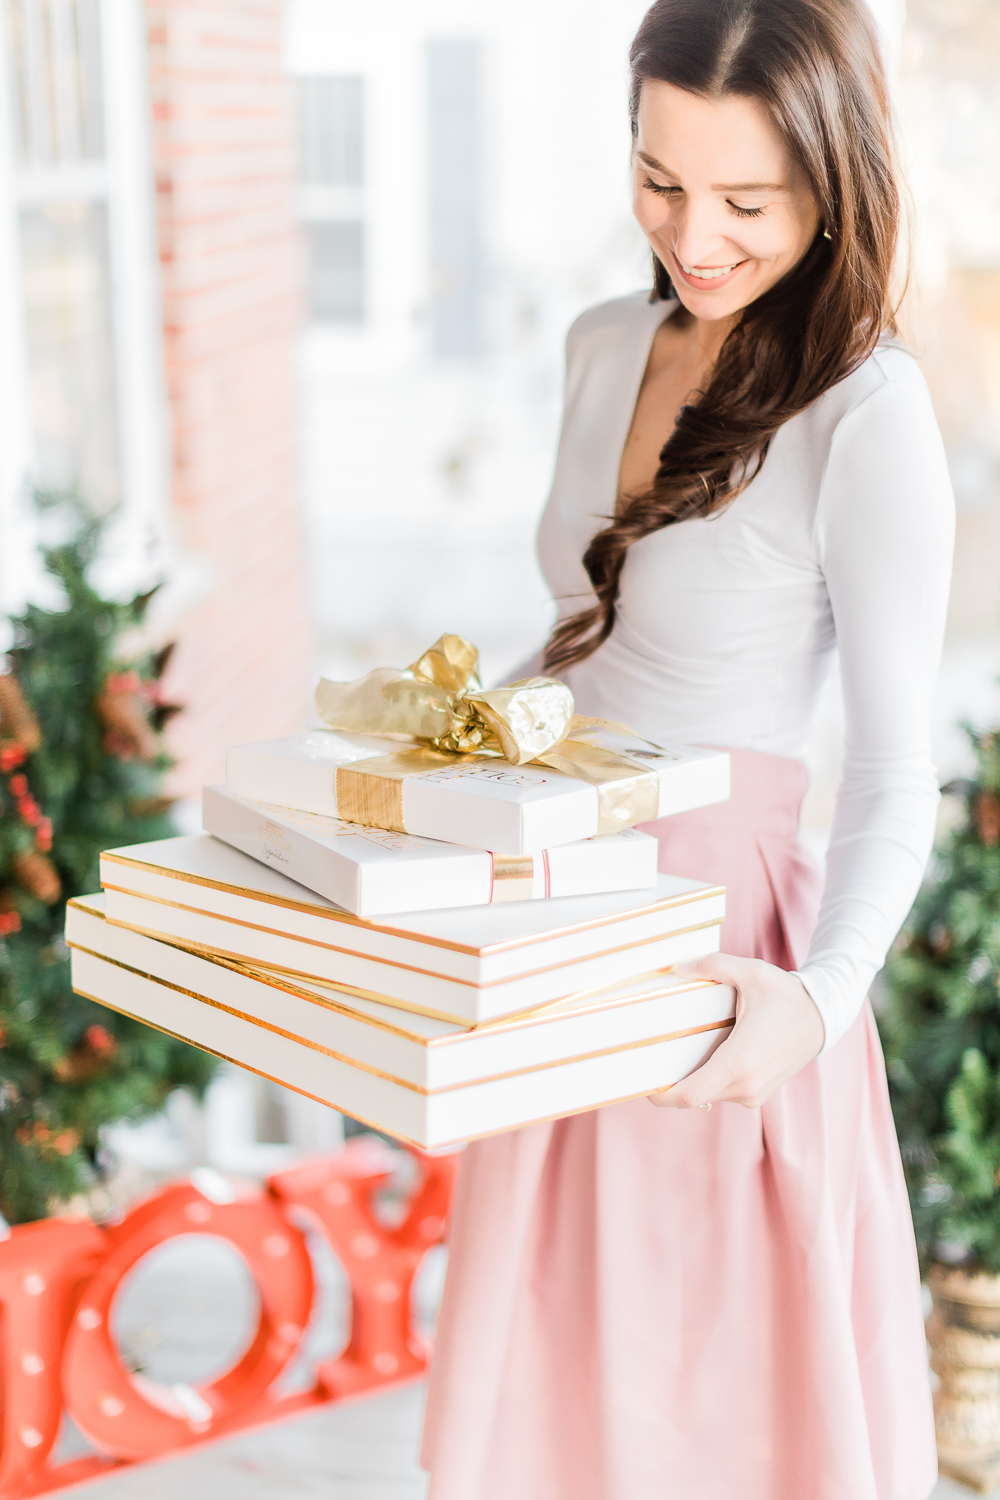 Cyber Monday 2019 Sales Guide, best Cyber Monday deals, best Cyber Monday style deals, best Cyber Monday beauty deals, best Cyber Monday home deals, gold Christmas wrapping ideas, girl holding presents, popular affordable fashion blogger Stephanie Ziajka, Diary of a Debutante